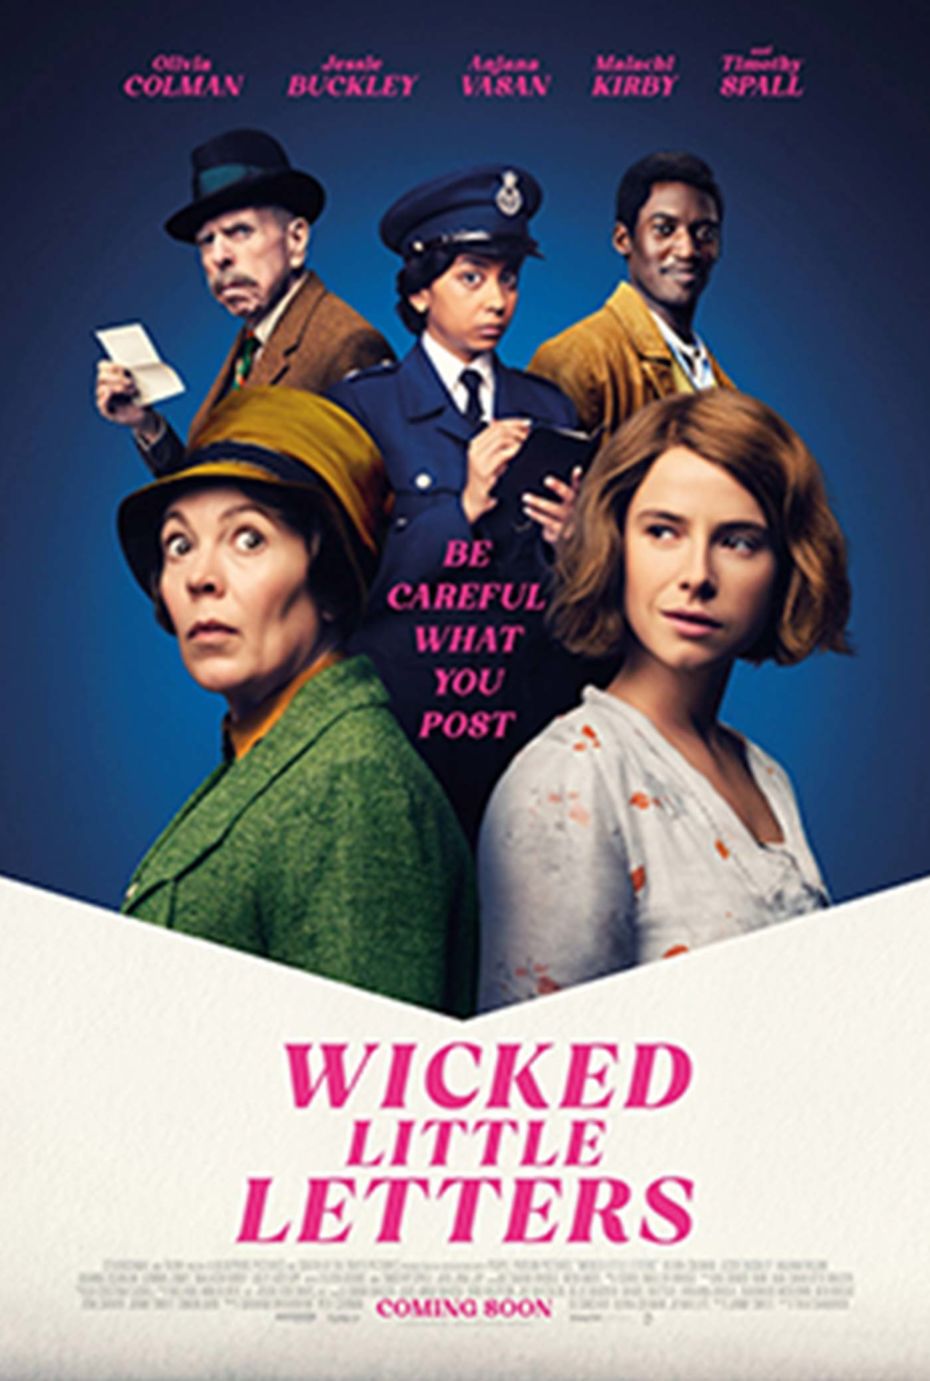 Poster for the film of Wicked little letters